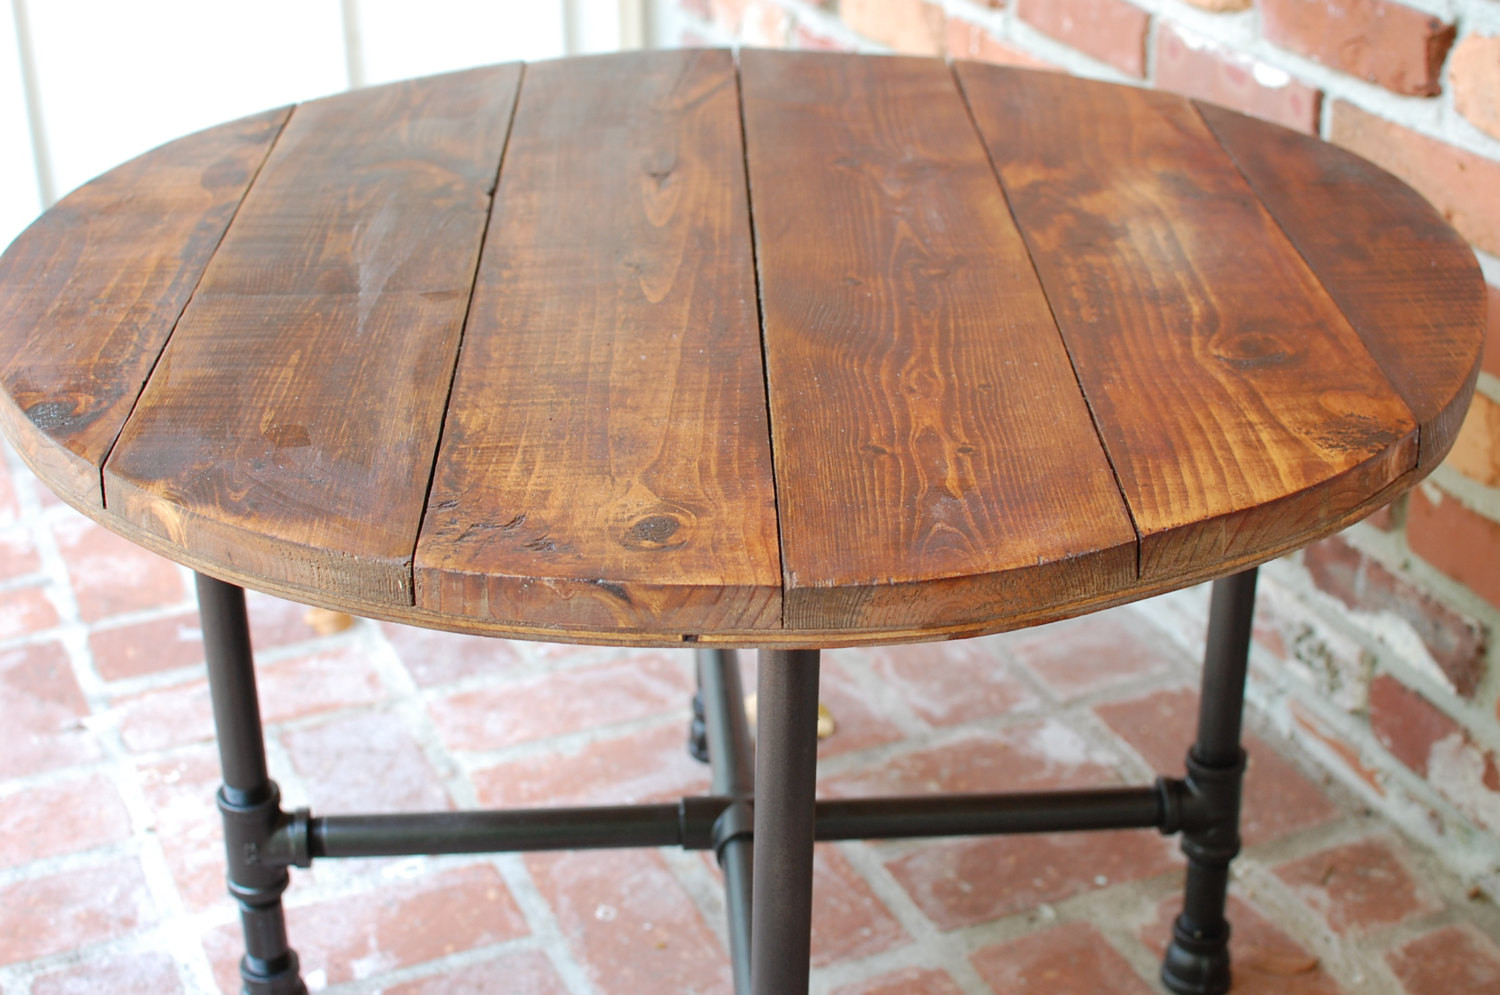 Rustic Round Kitchen Table
 Round Coffee Table Industrial Wood Table 30 by